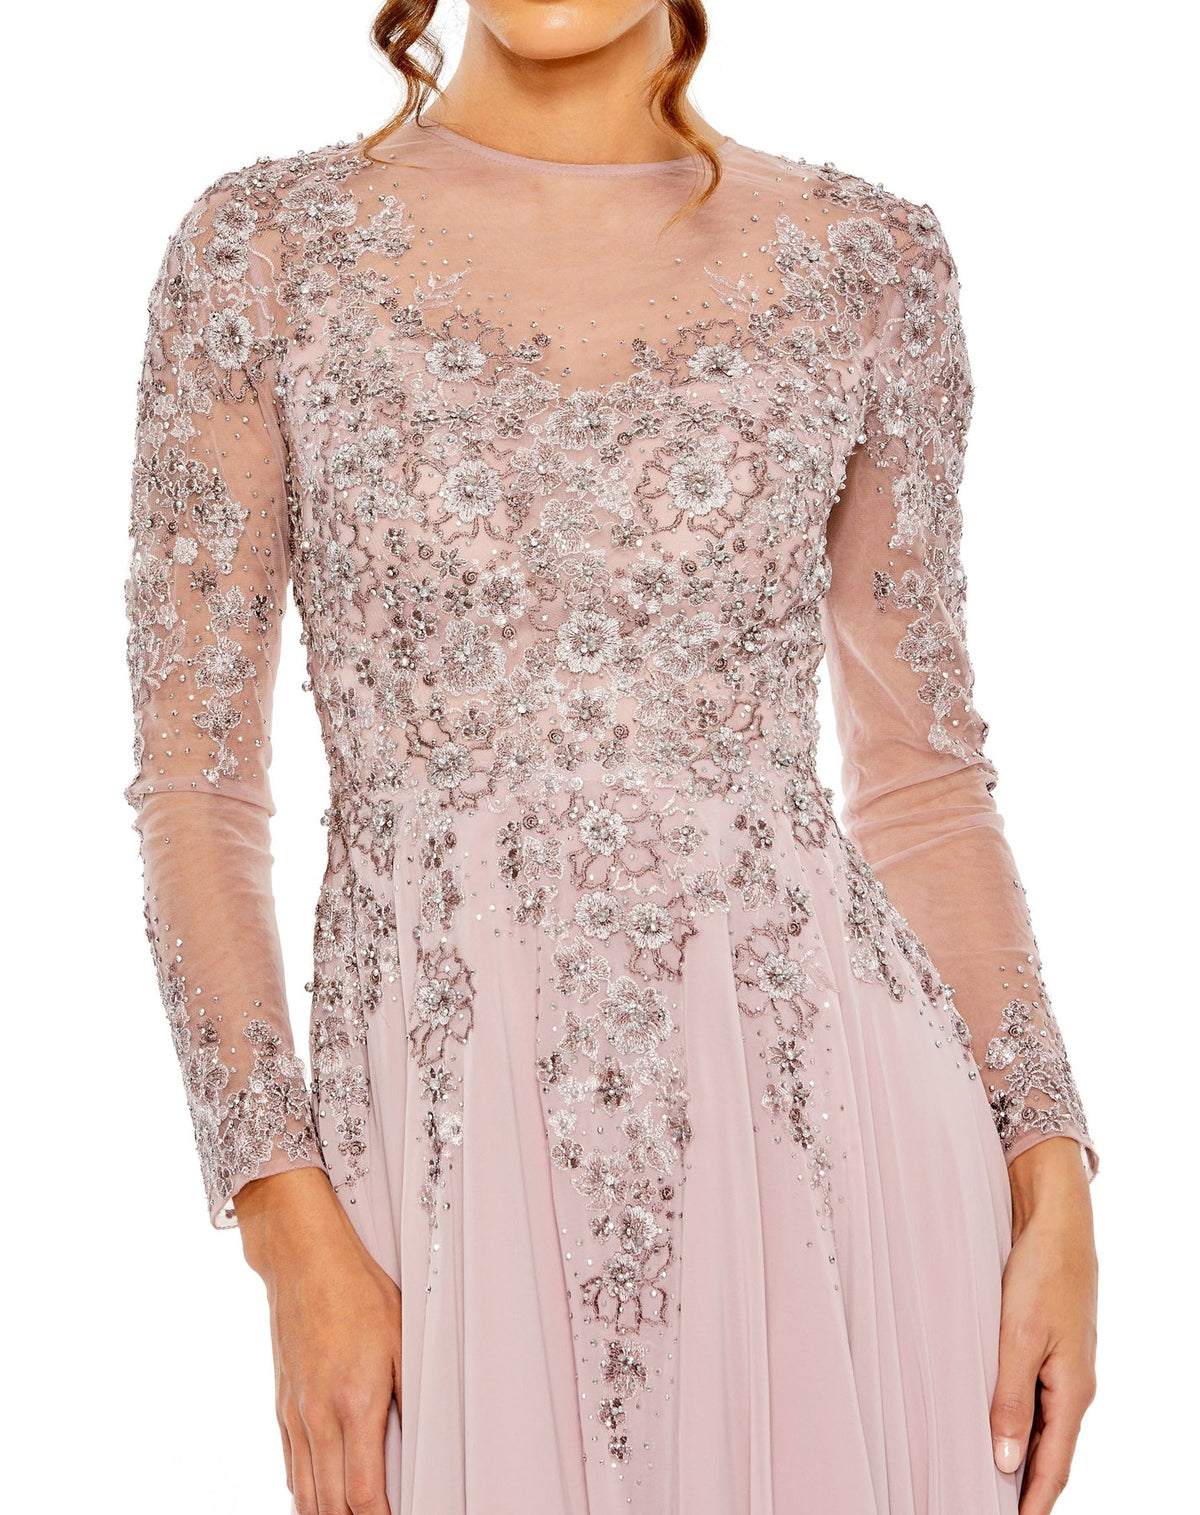 High neck long sleeve crystal embellished A Line gown - Lilac